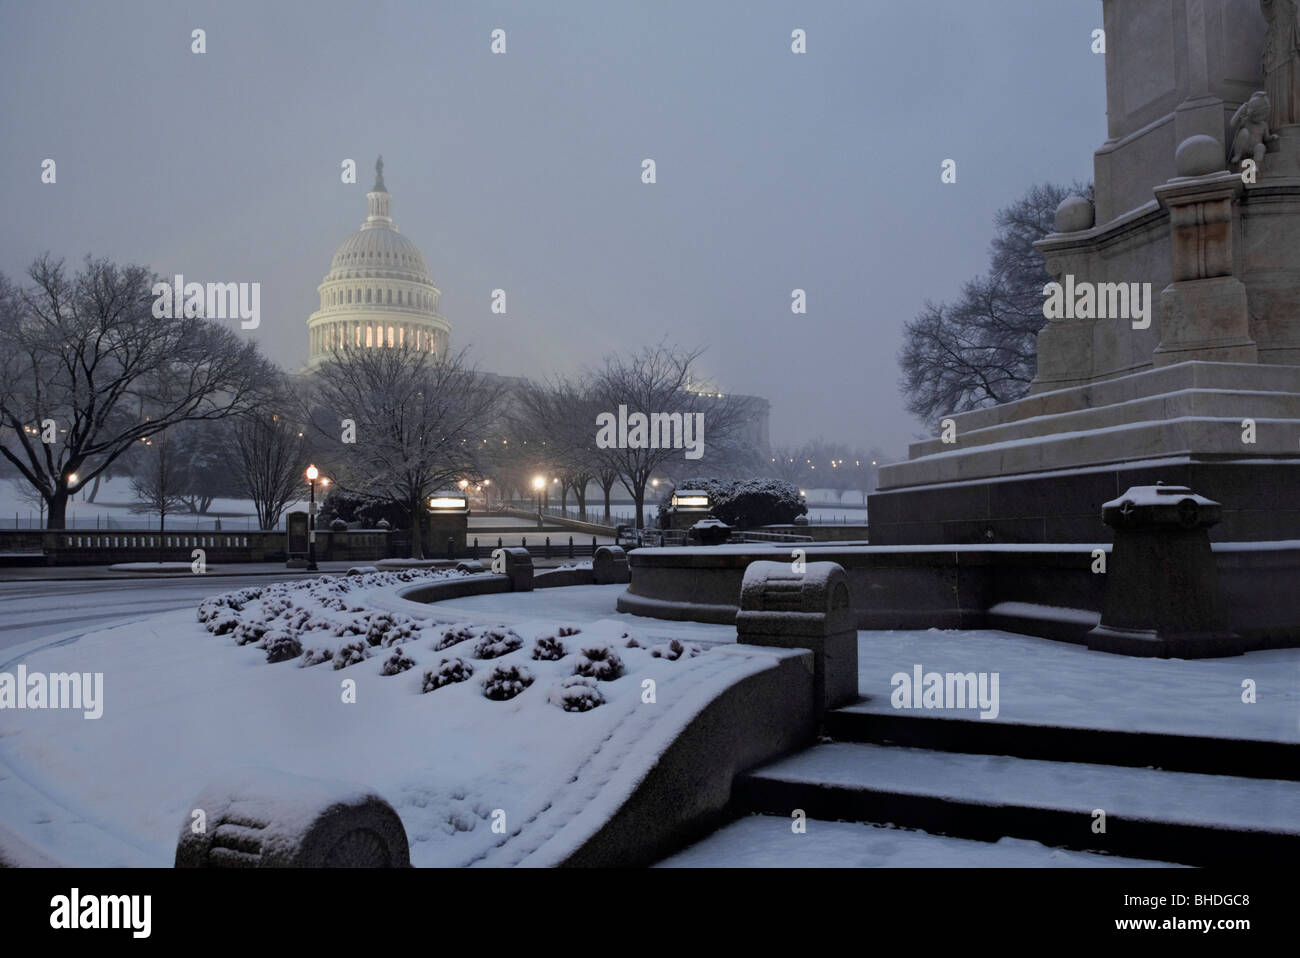 The US Capitol Building at night in the snow. Stock Photo